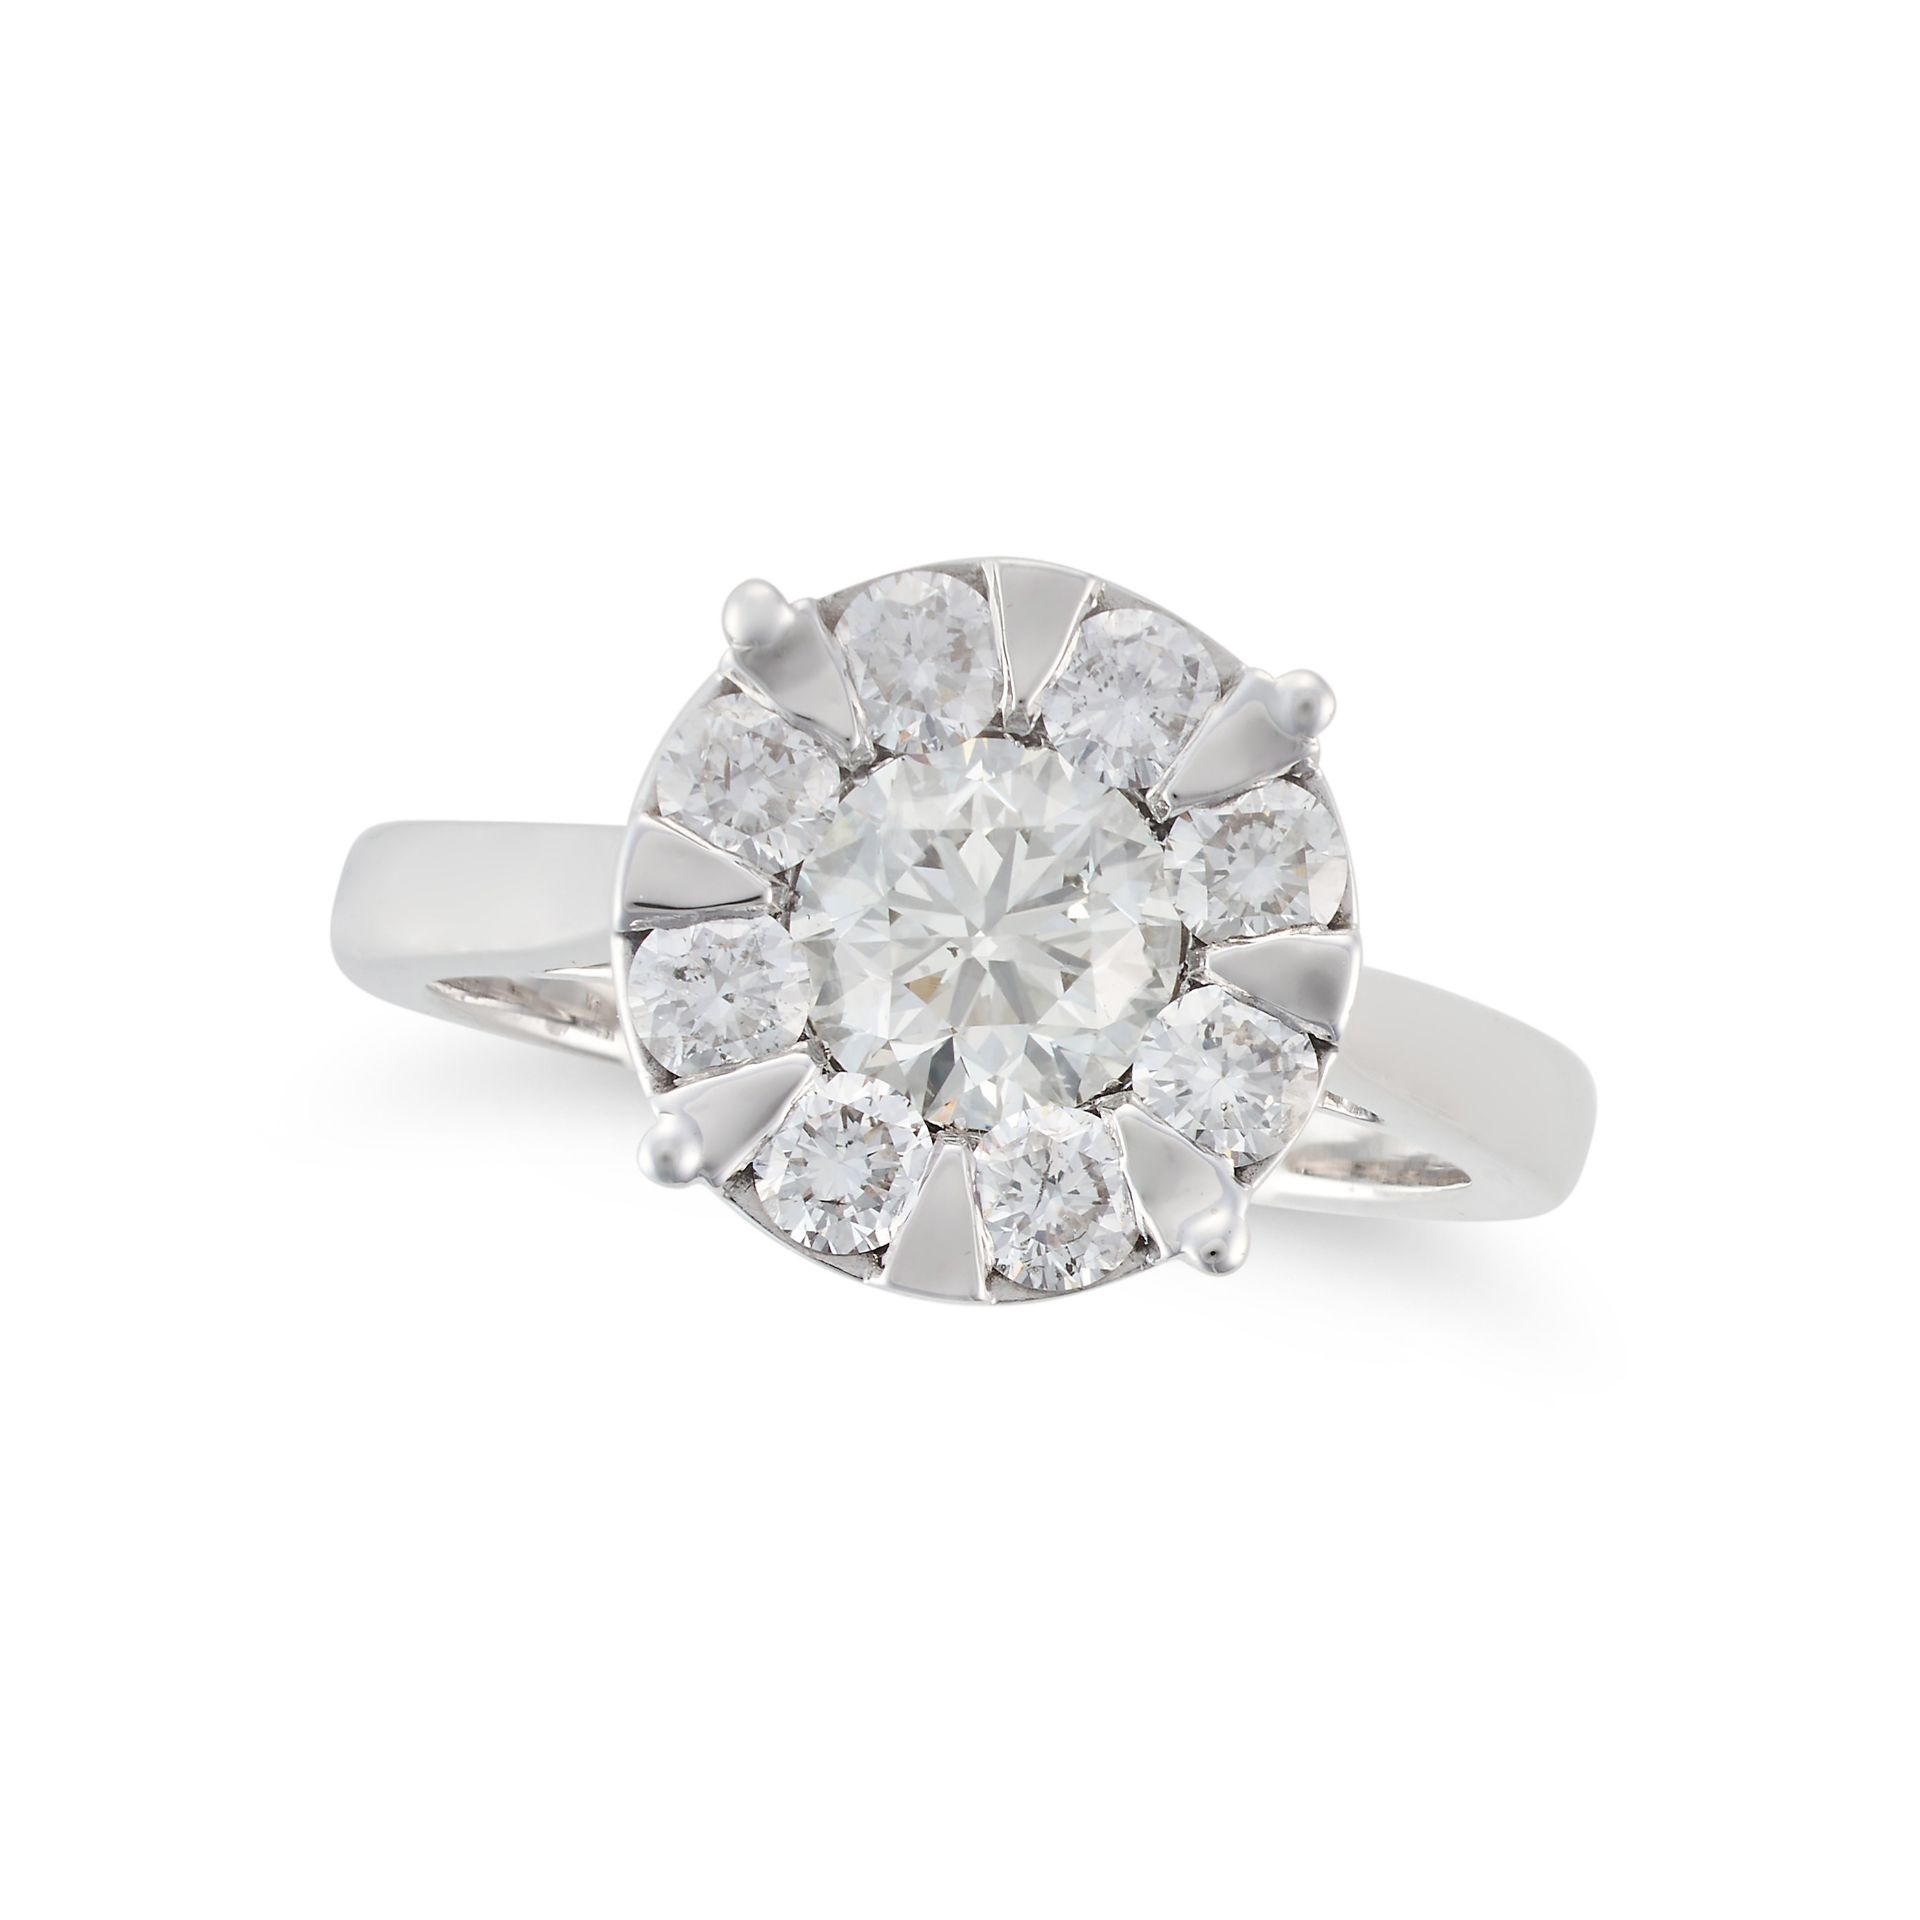 A DIAMOND CLUSTER RING set with a round brilliant cut diamond of 0.80 carats in a cluster of furt...